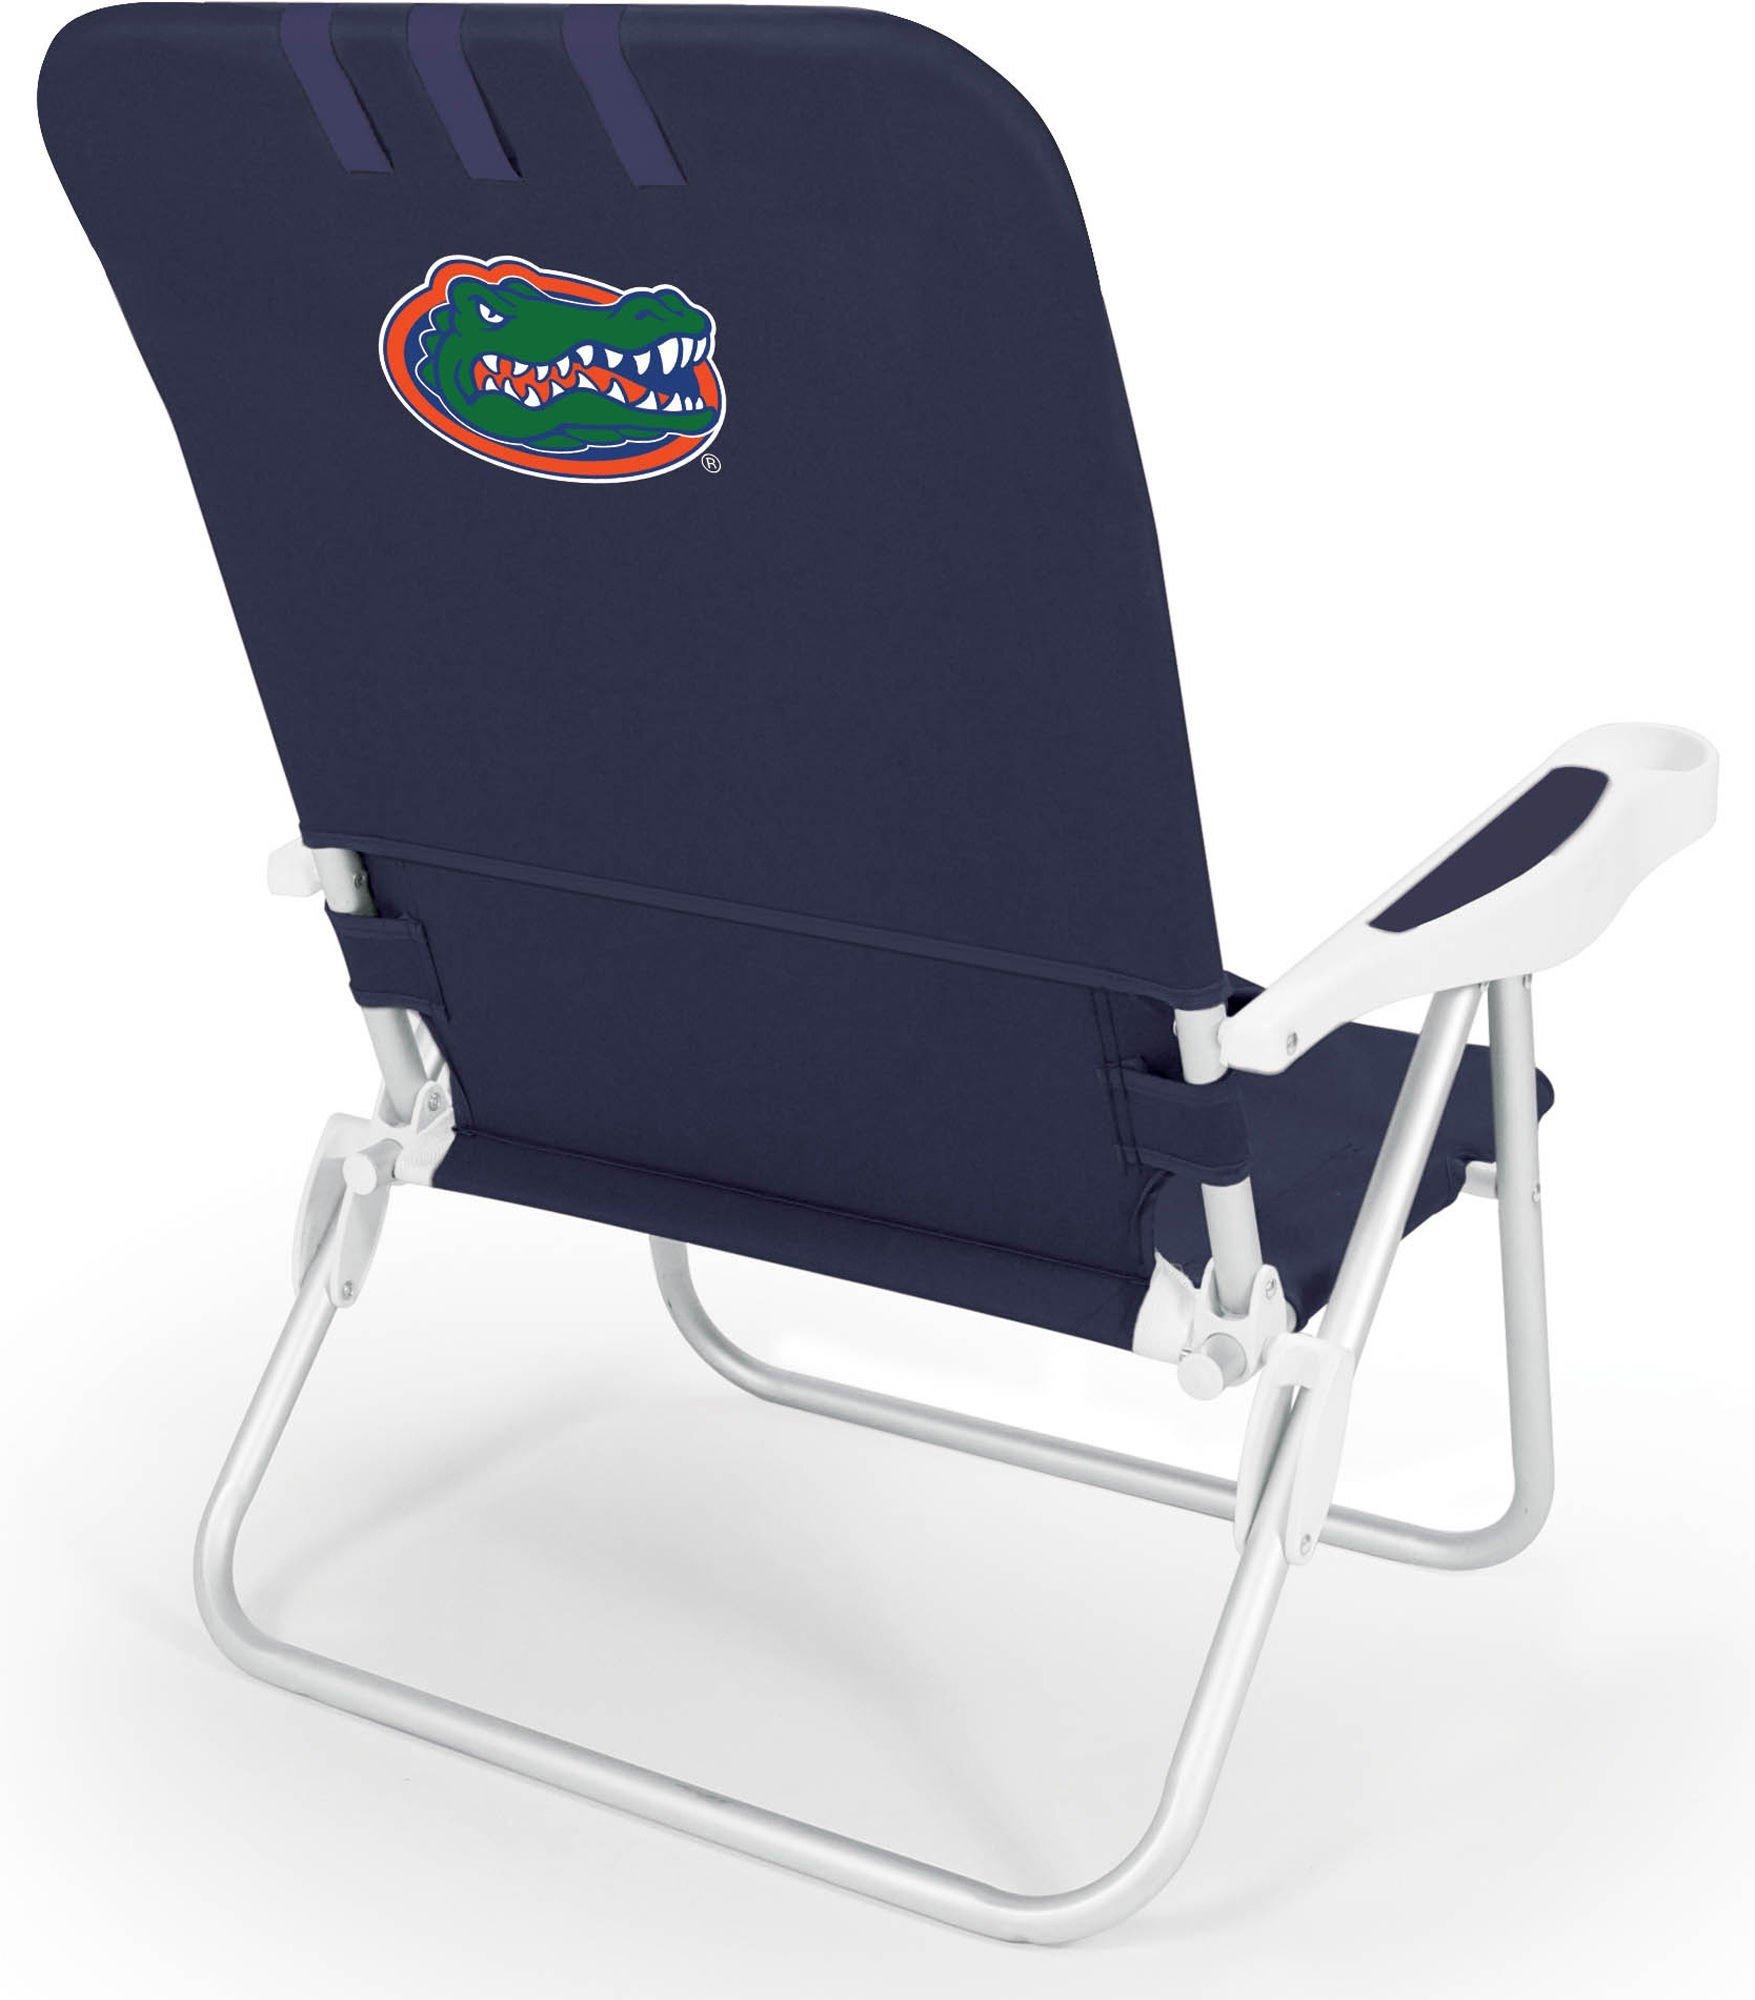 Florida Gator Monaco Backpack Chair by Picnic Time